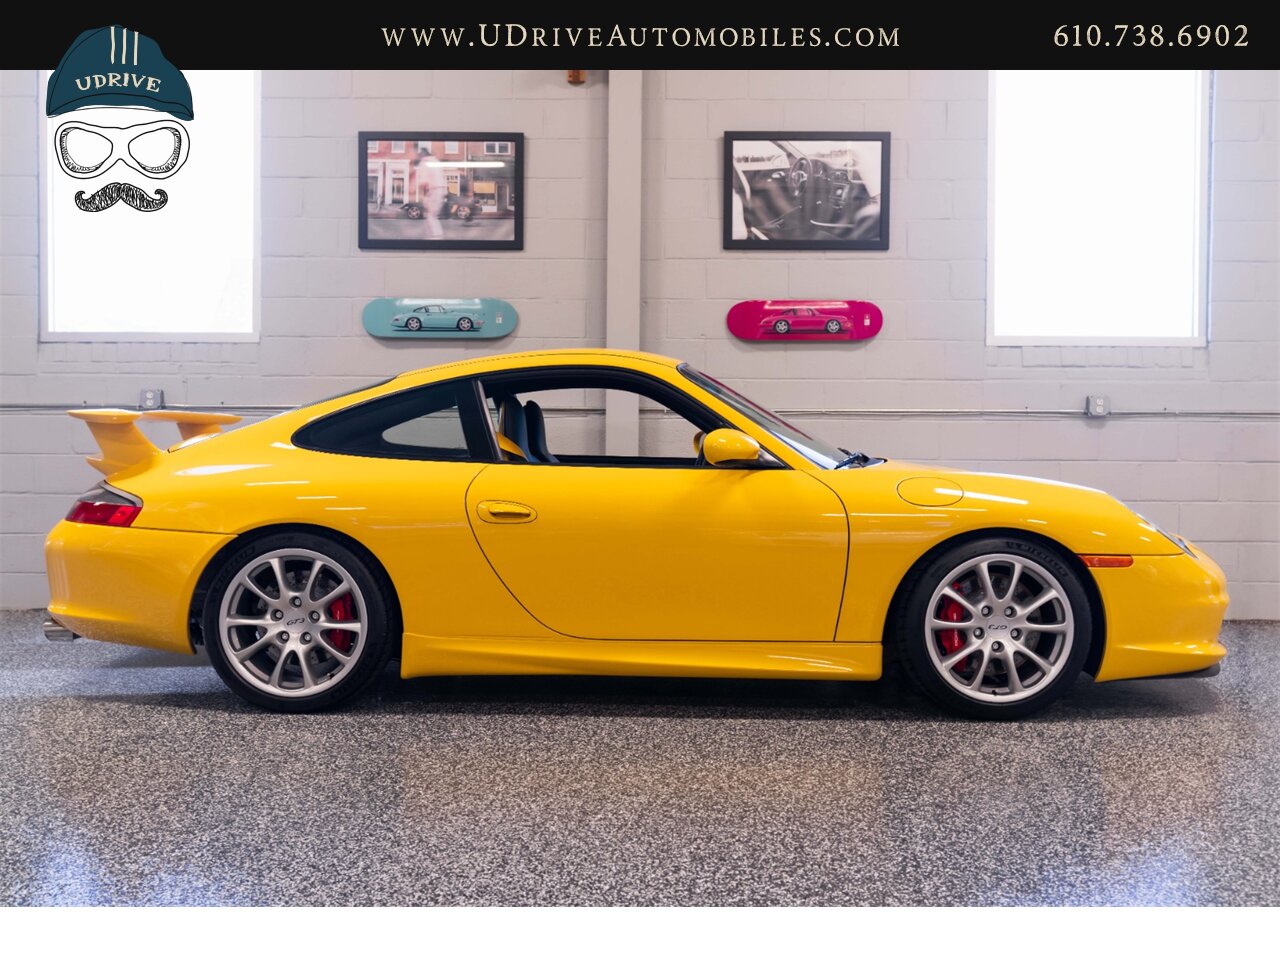 2005 Porsche 911 GT3 996 Speed Yellow Sport Seats Pntd Hardbacks  Pntd Console Deviating Stitch Yellow Accents Throughout - Photo 18 - West Chester, PA 19382